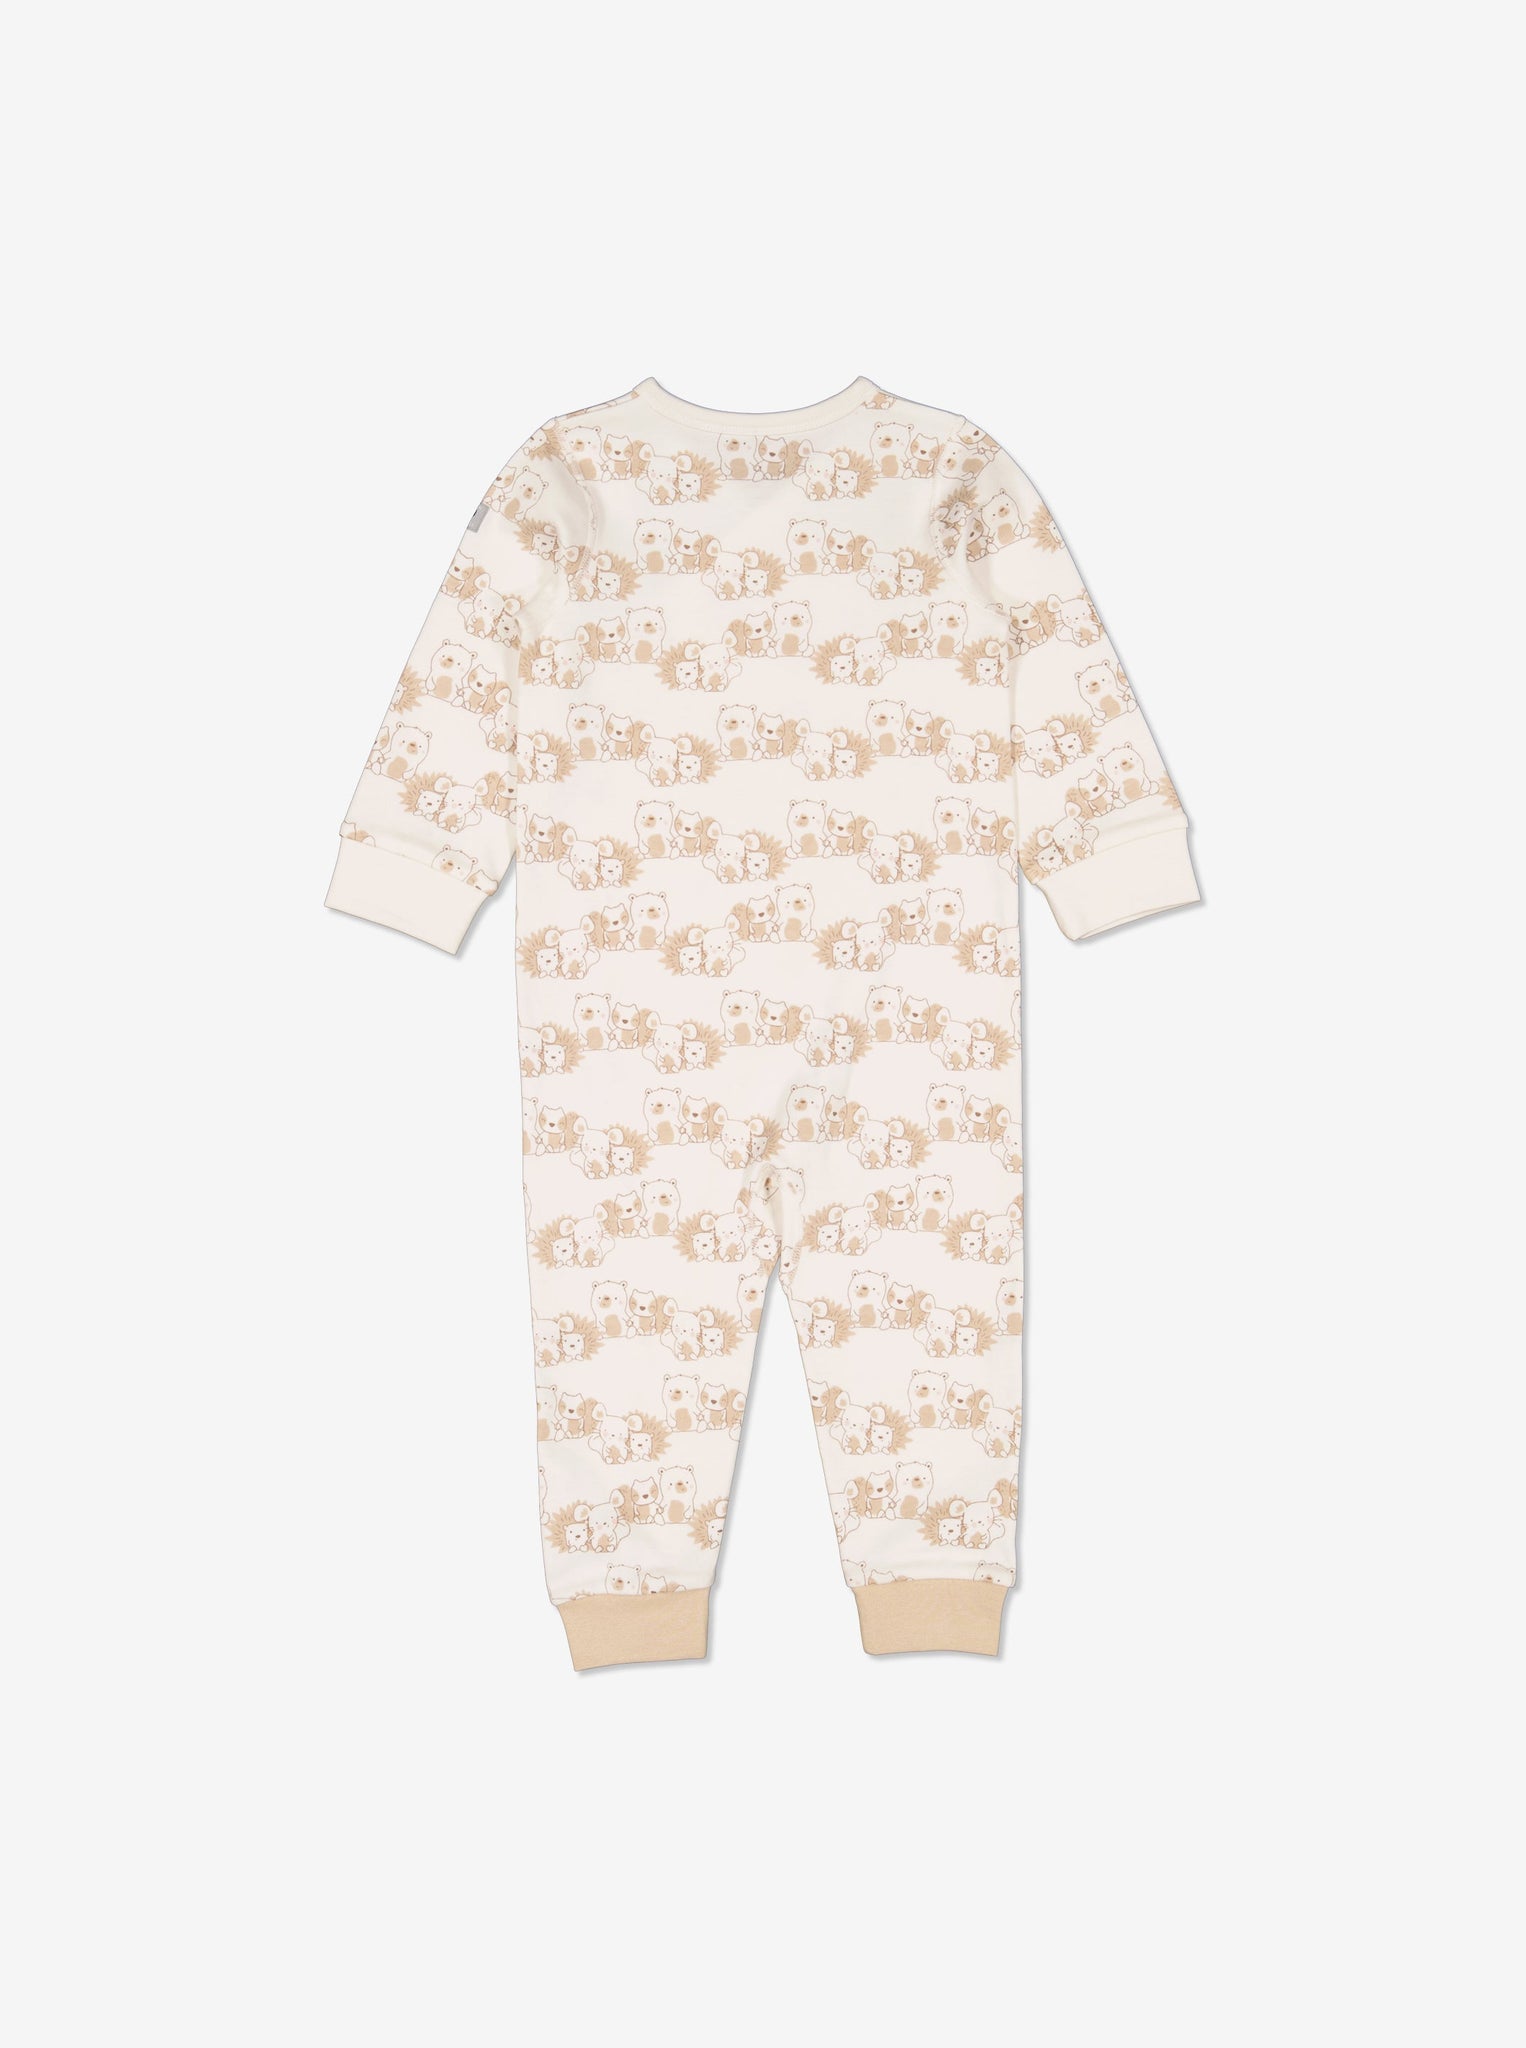  Animal Print Newborn Baby Romper from Polarn O. Pyret Kidswear. Made using ethically sourced materials.